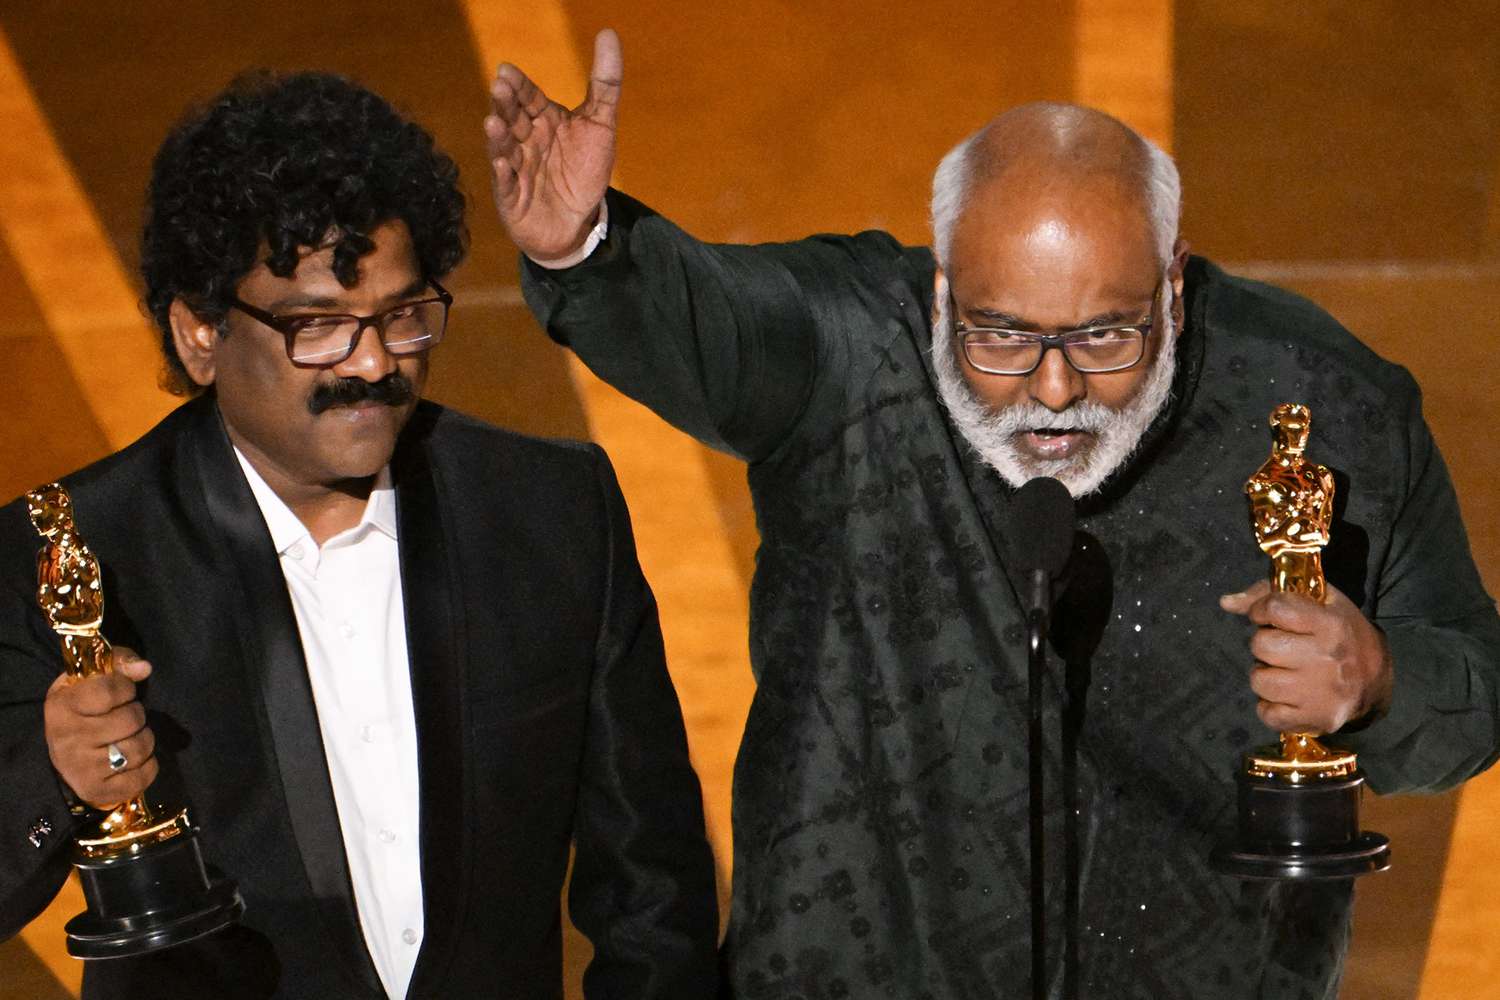 M.M. Keeravaani and Chandrabose accept the Oscar for Best Original Song for 'Naatu Naatu' from 'RRR'